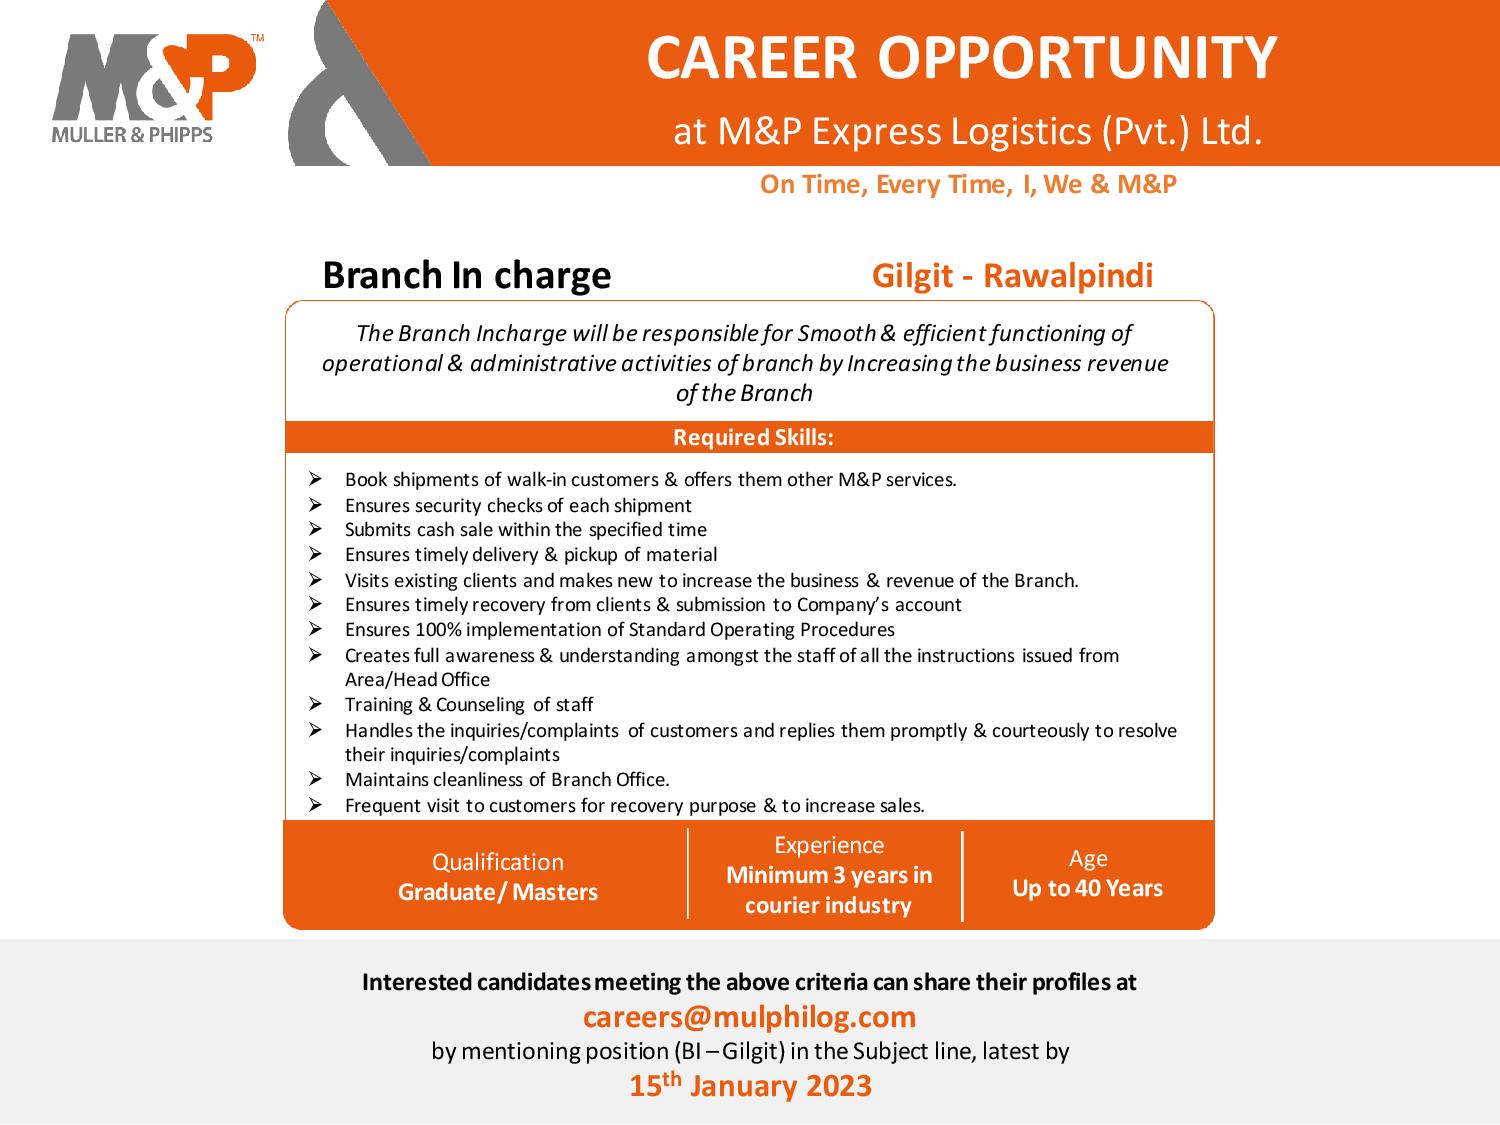 Branch Incharge opportunity at M&P Express Logistics Branch Office